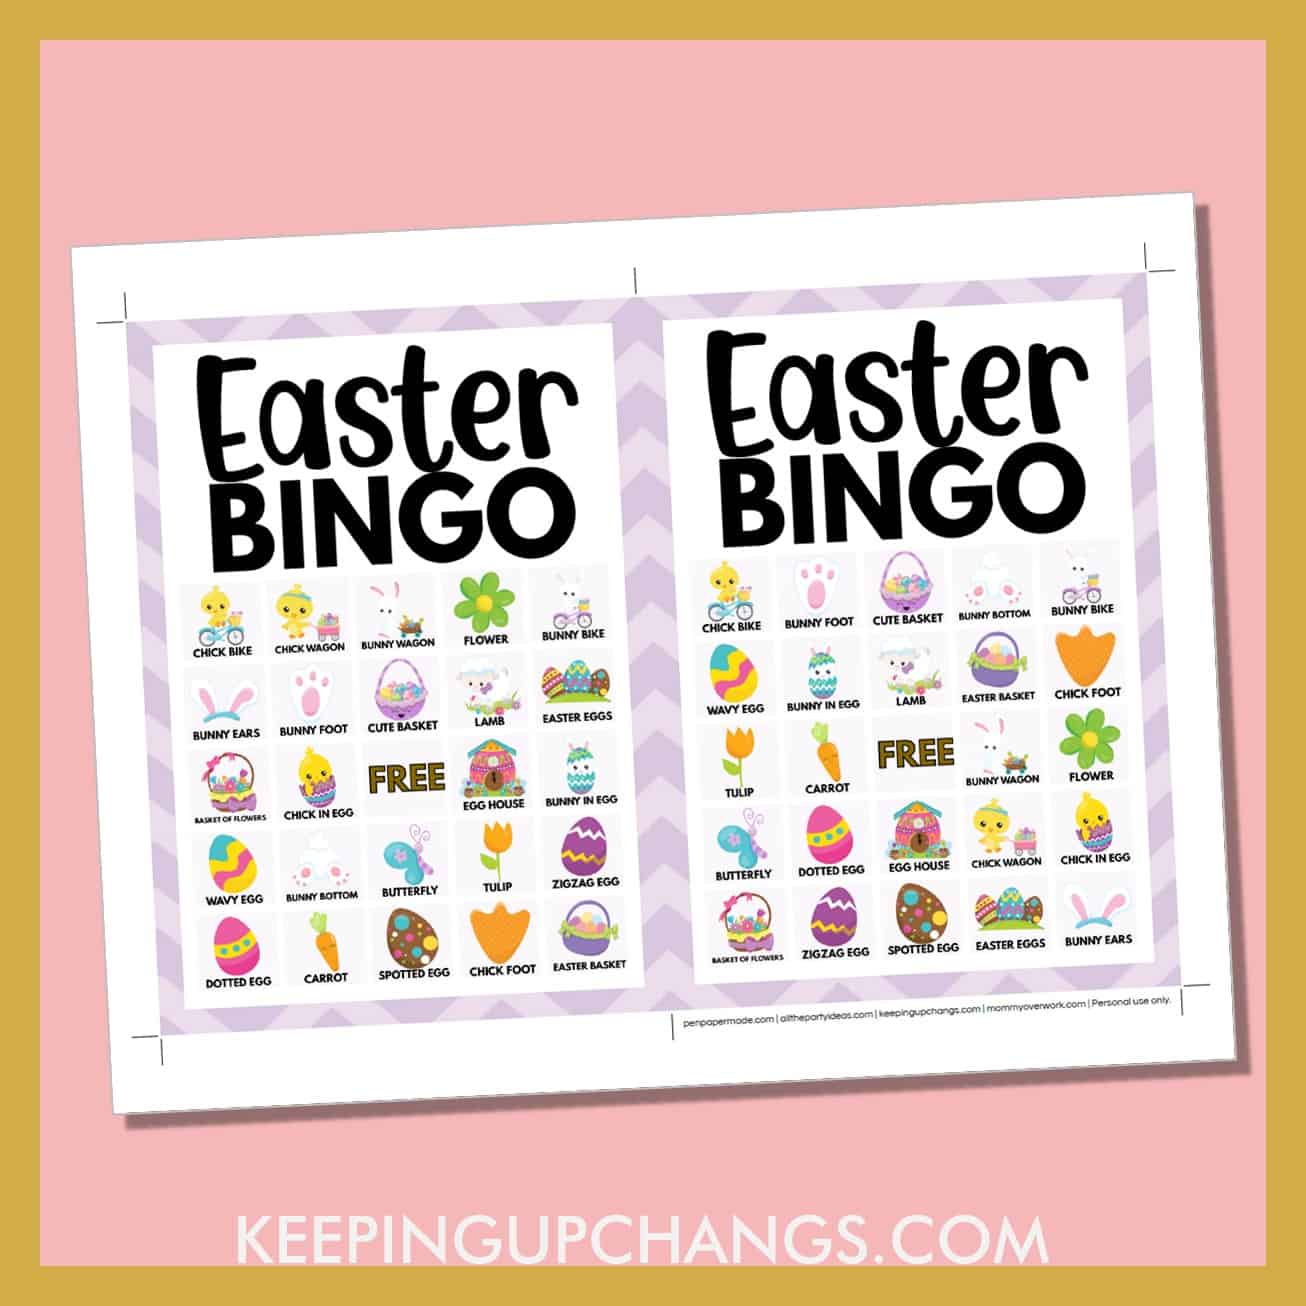 free easter bingo card 5x5 5x7 game boards with images and text words.